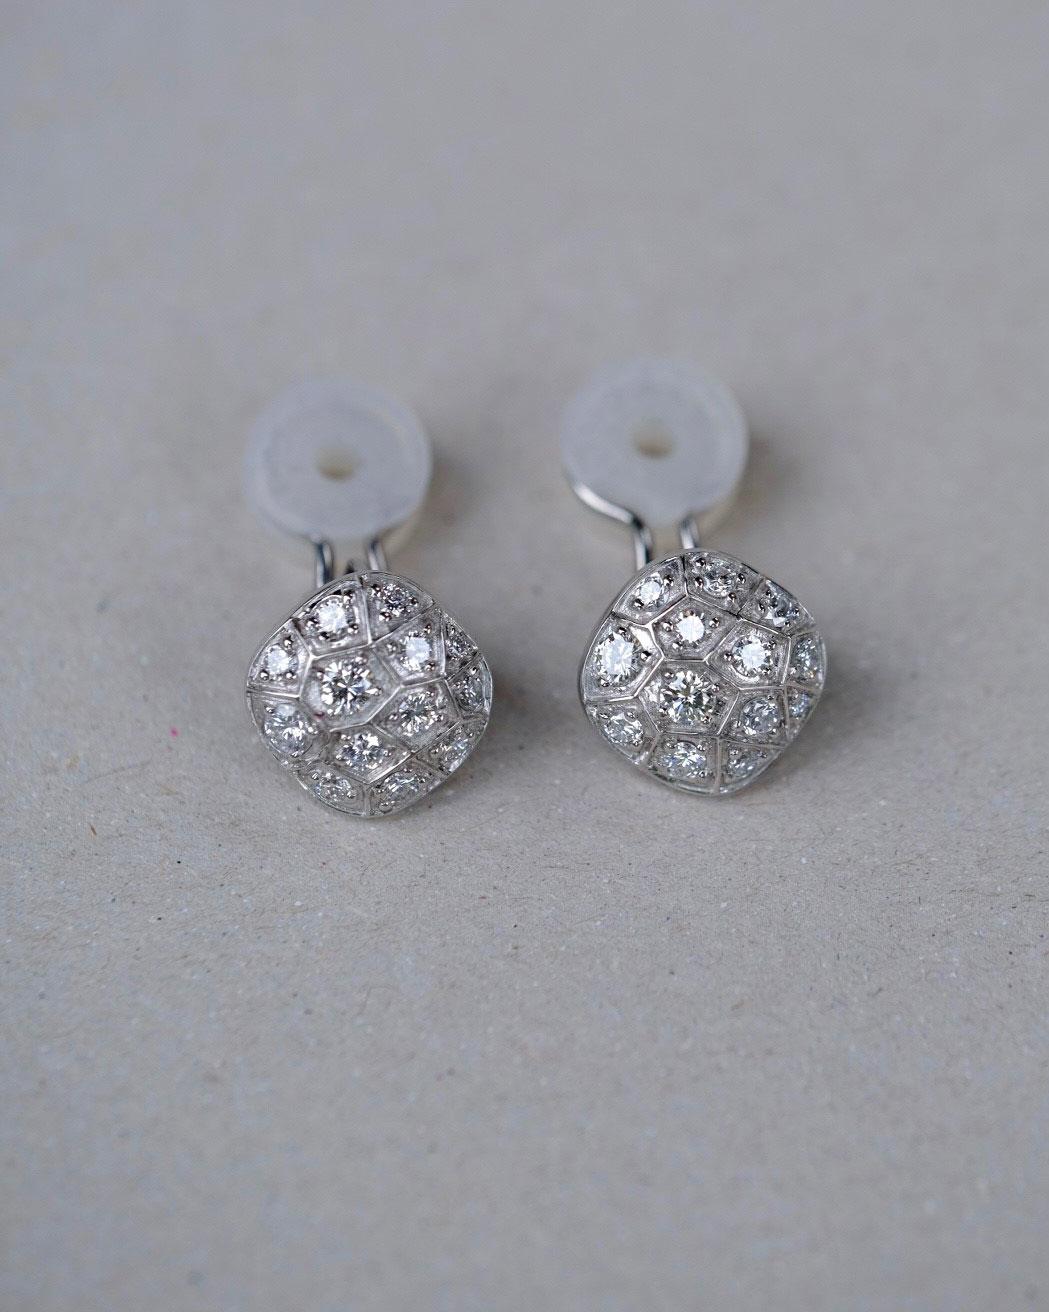 Earrings in White Gold with 26 Diamonds, 1, 56ct.. For Sale 2